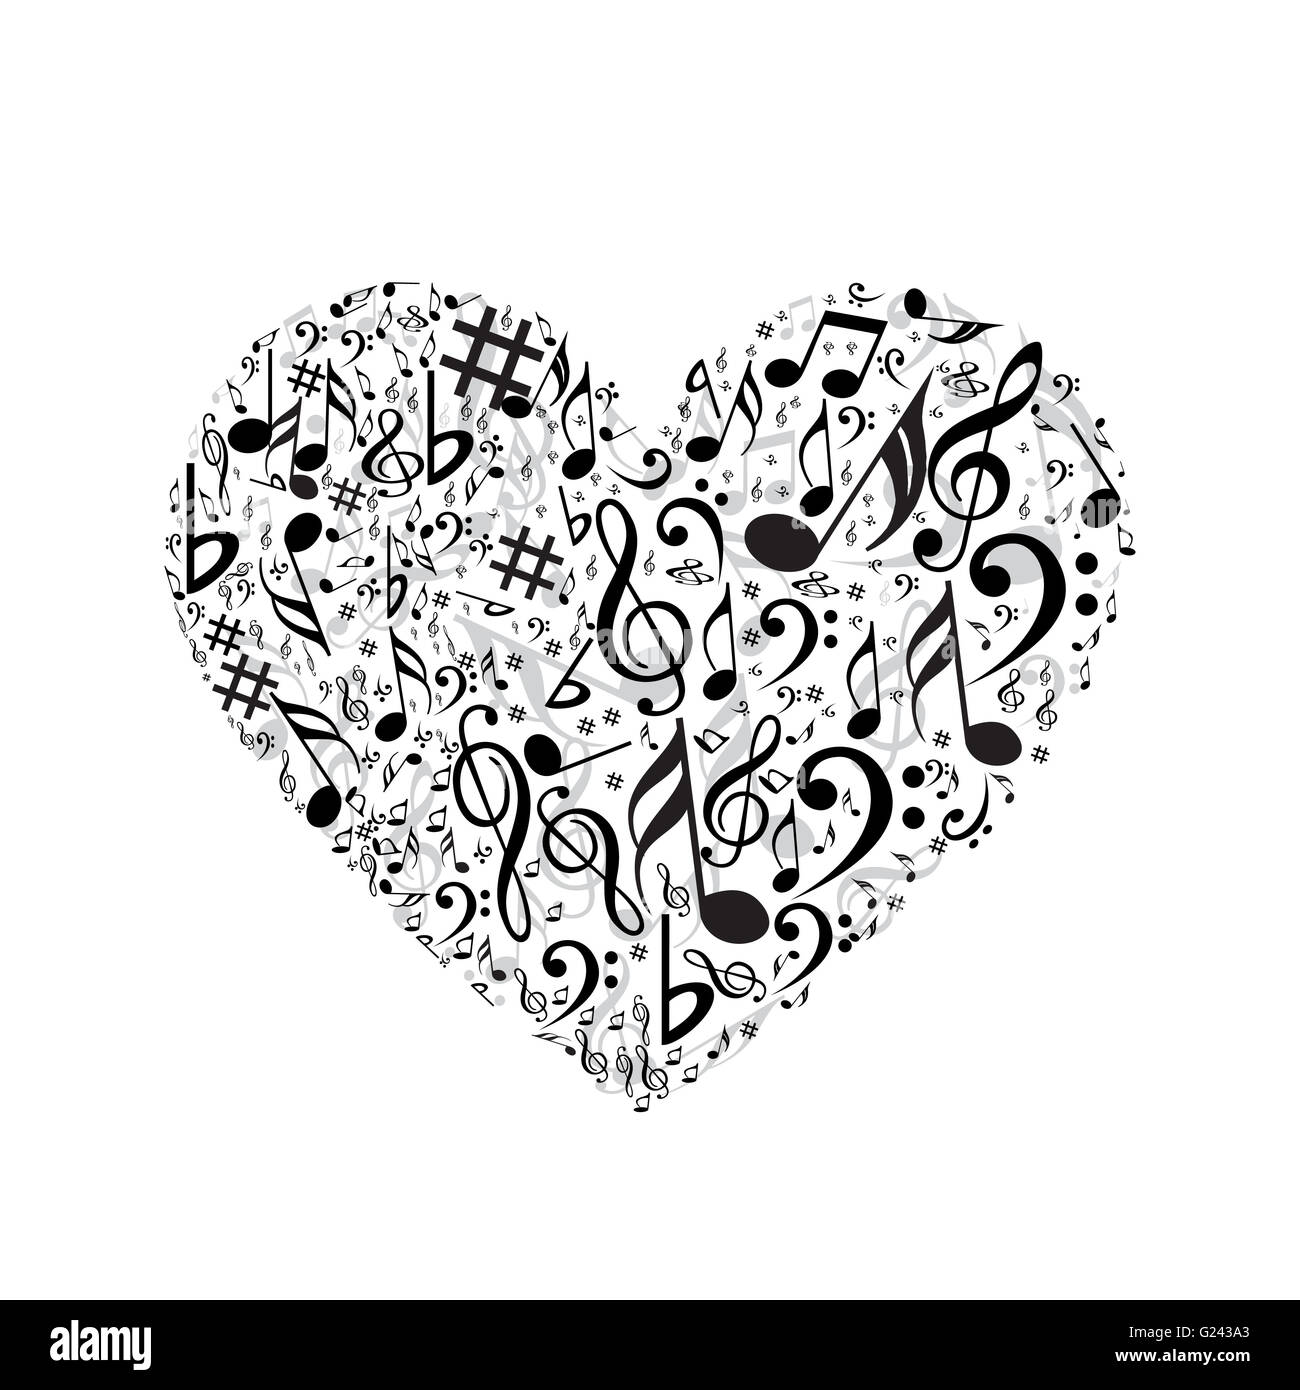 Heart with music symbol icon collection Stock Photo